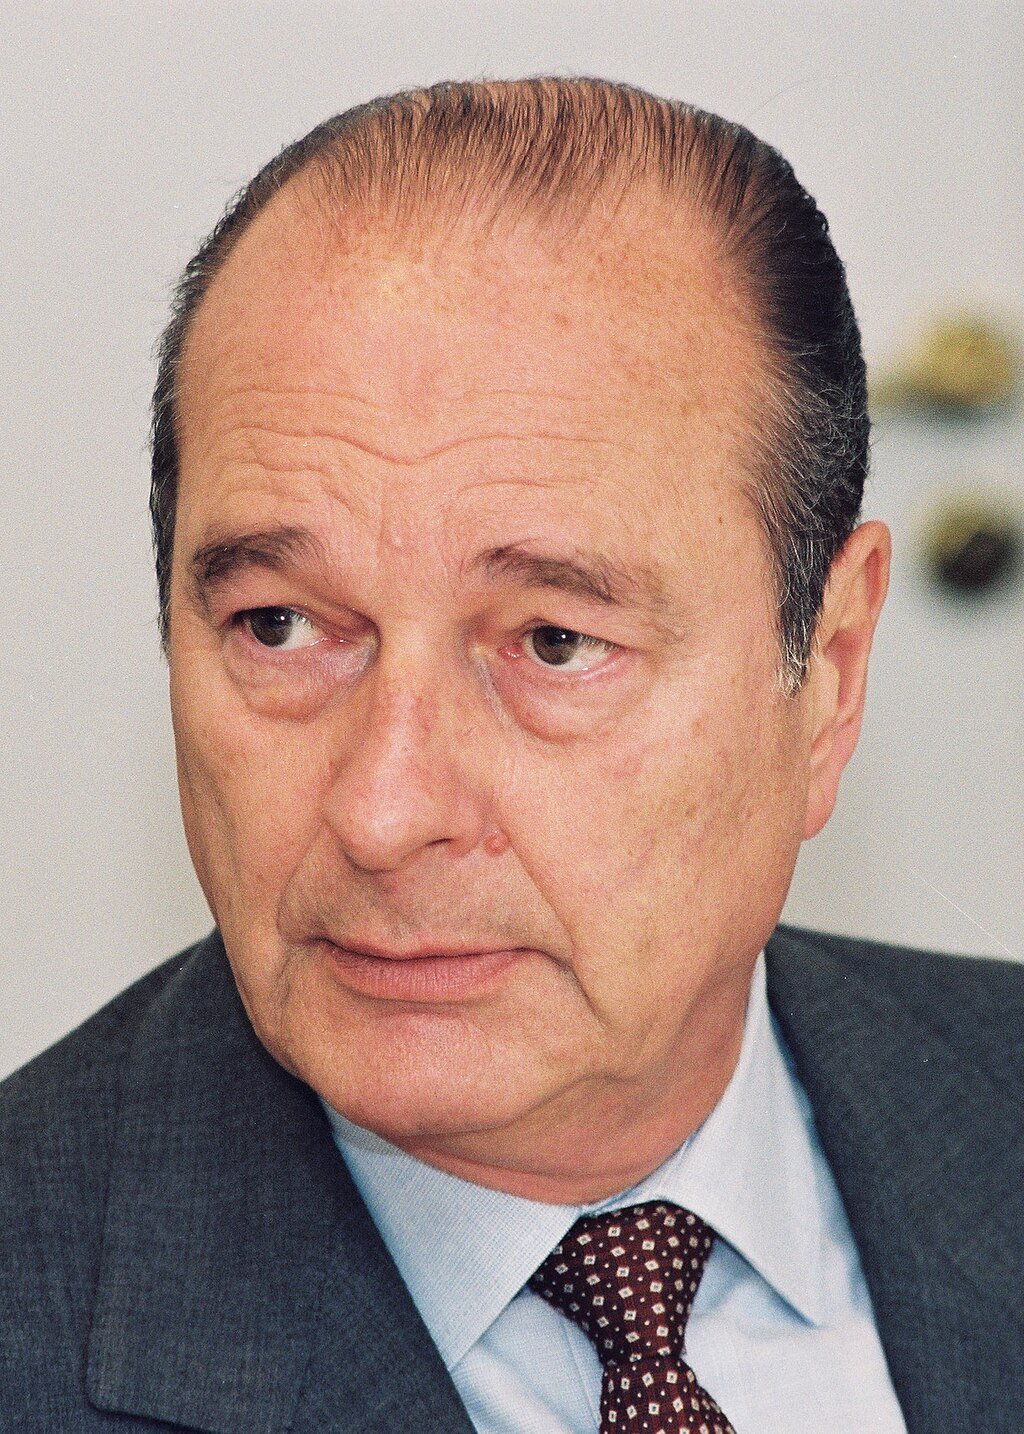 Jacques Chirac 5. Presidents of the Fifth Republic of France